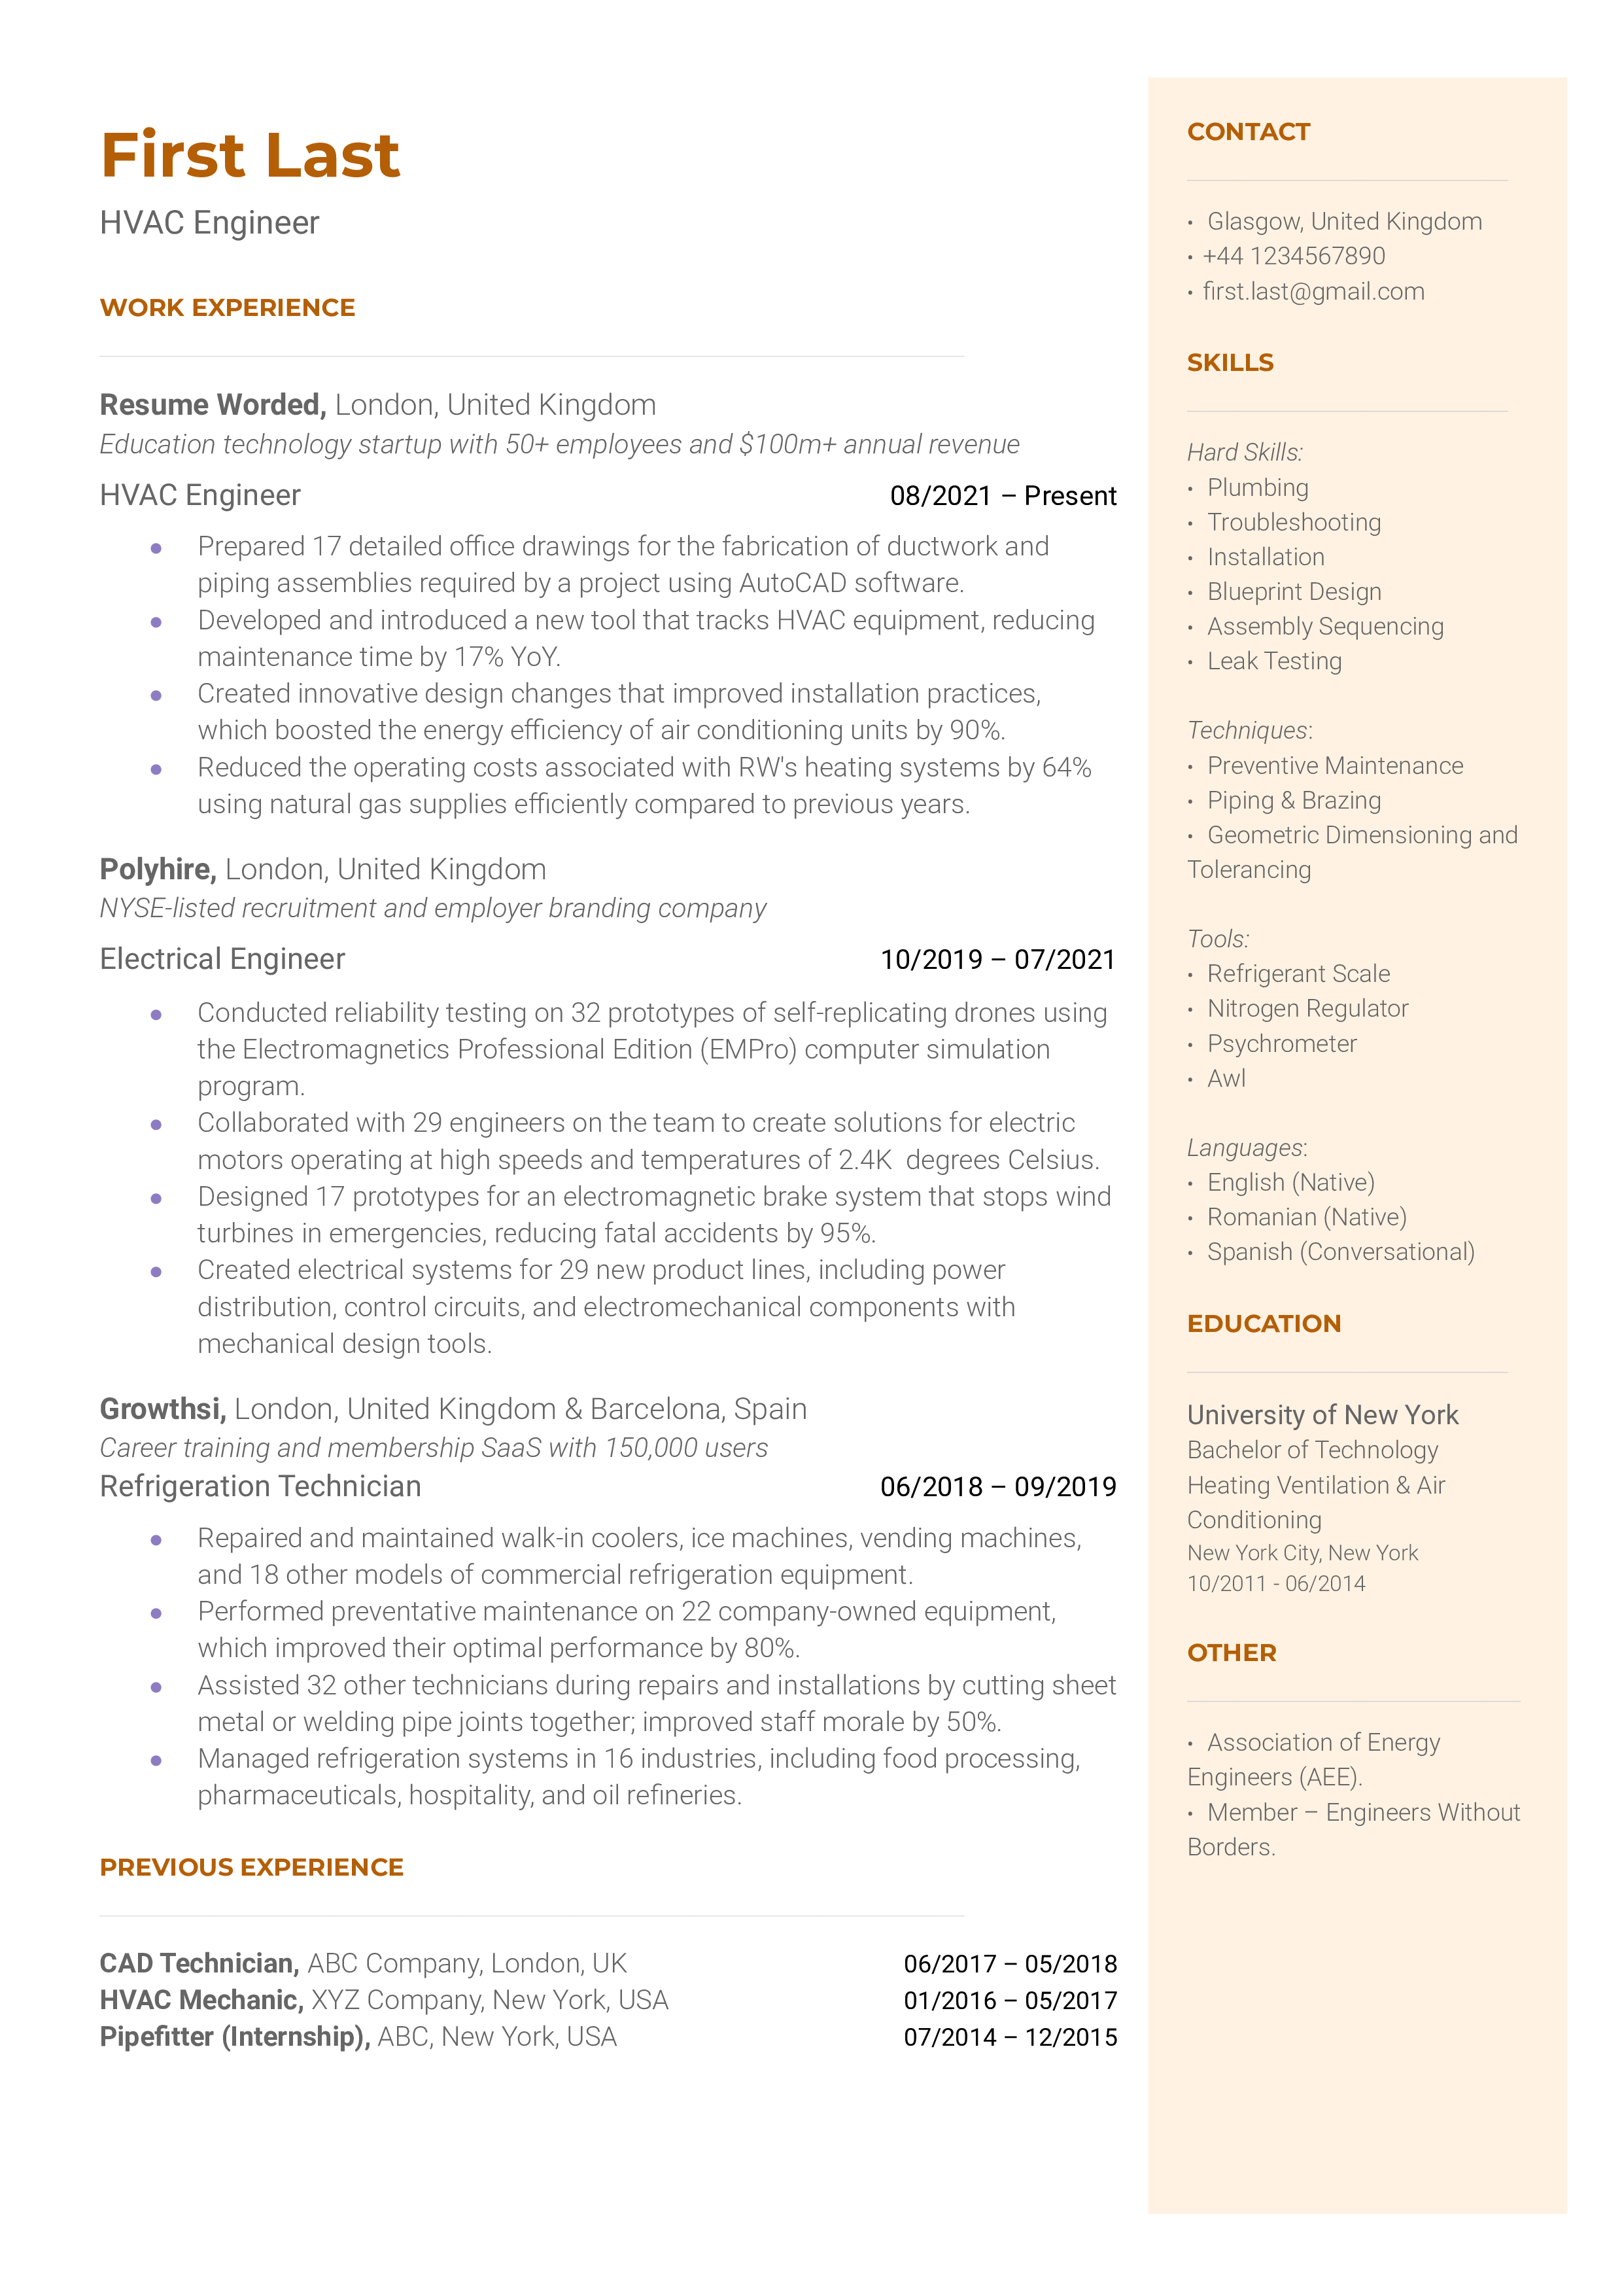 A HVAC engineer resume template that uses strong action verbs